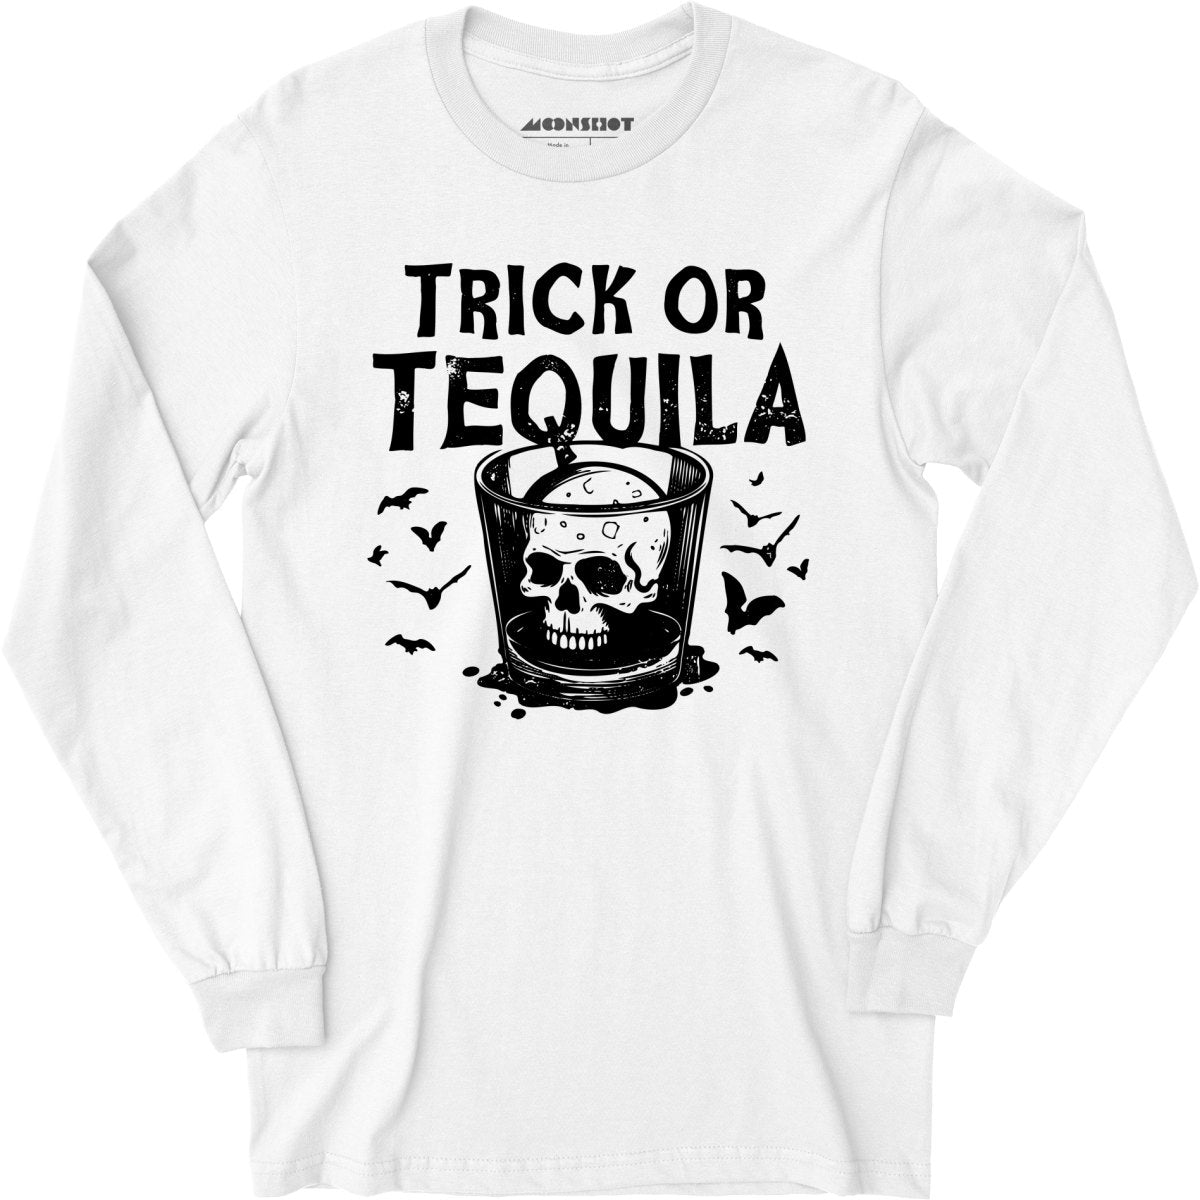 Trick or Tequila - Long Sleeve T-Shirt